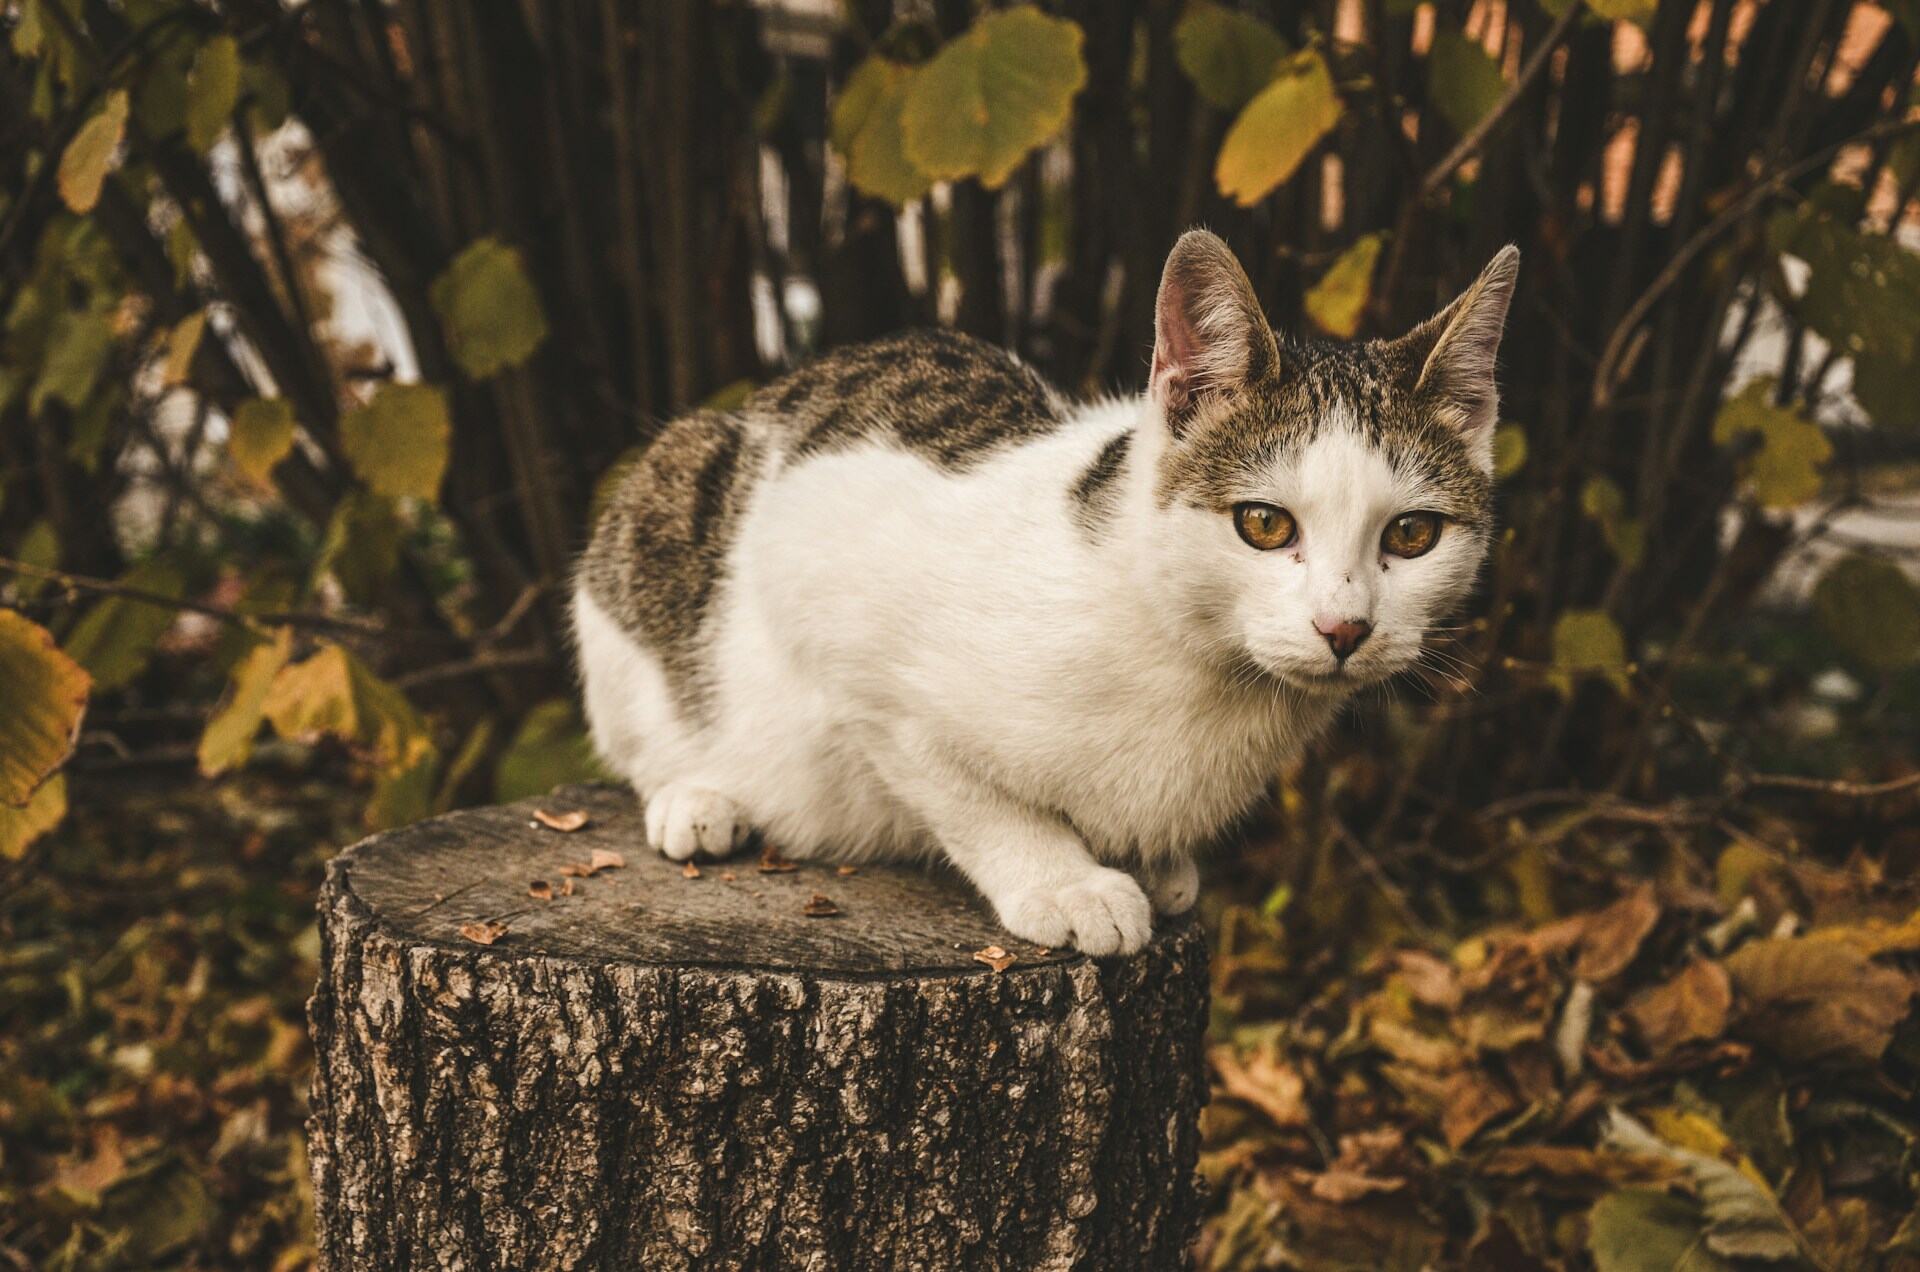 An outdoor cat sitting on a wooden log in a leafy area